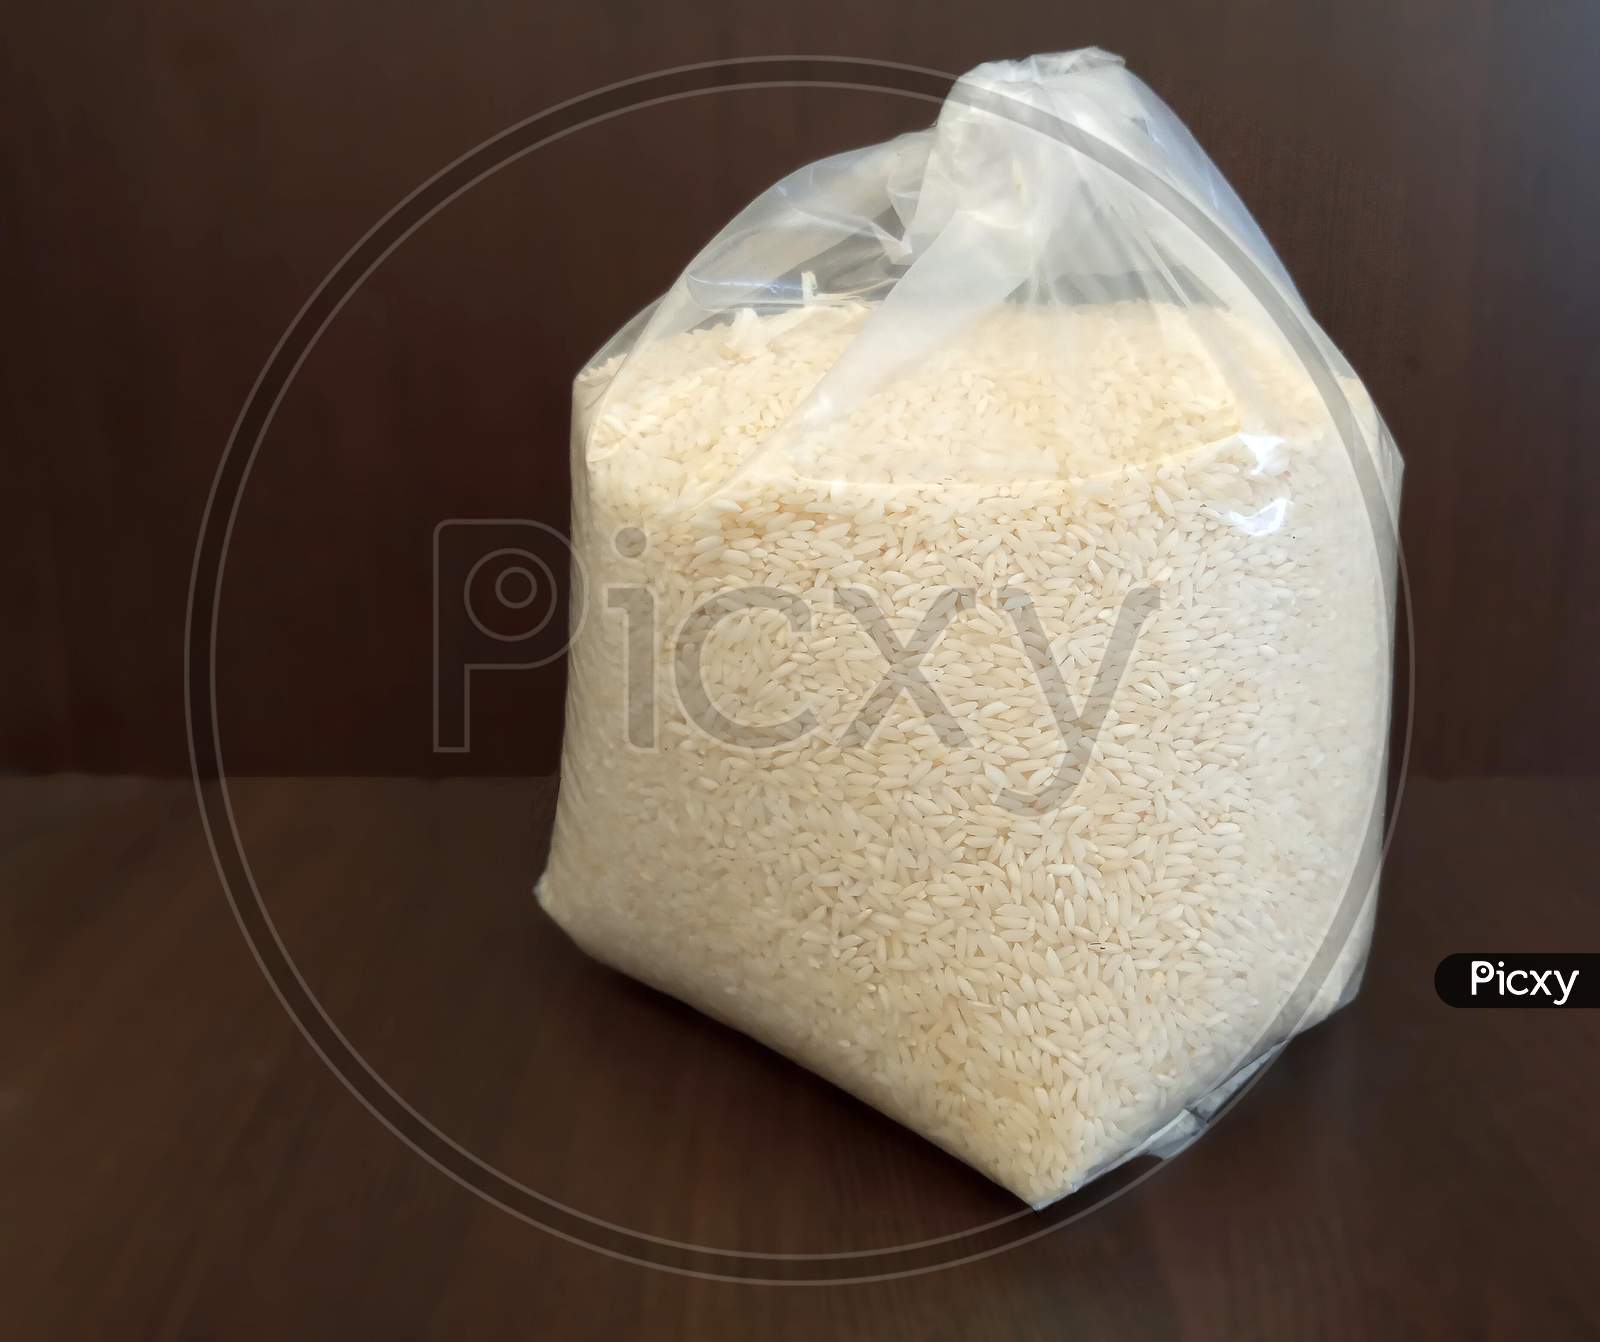 Rice Packet purchased as household provision, a staple food in southern India